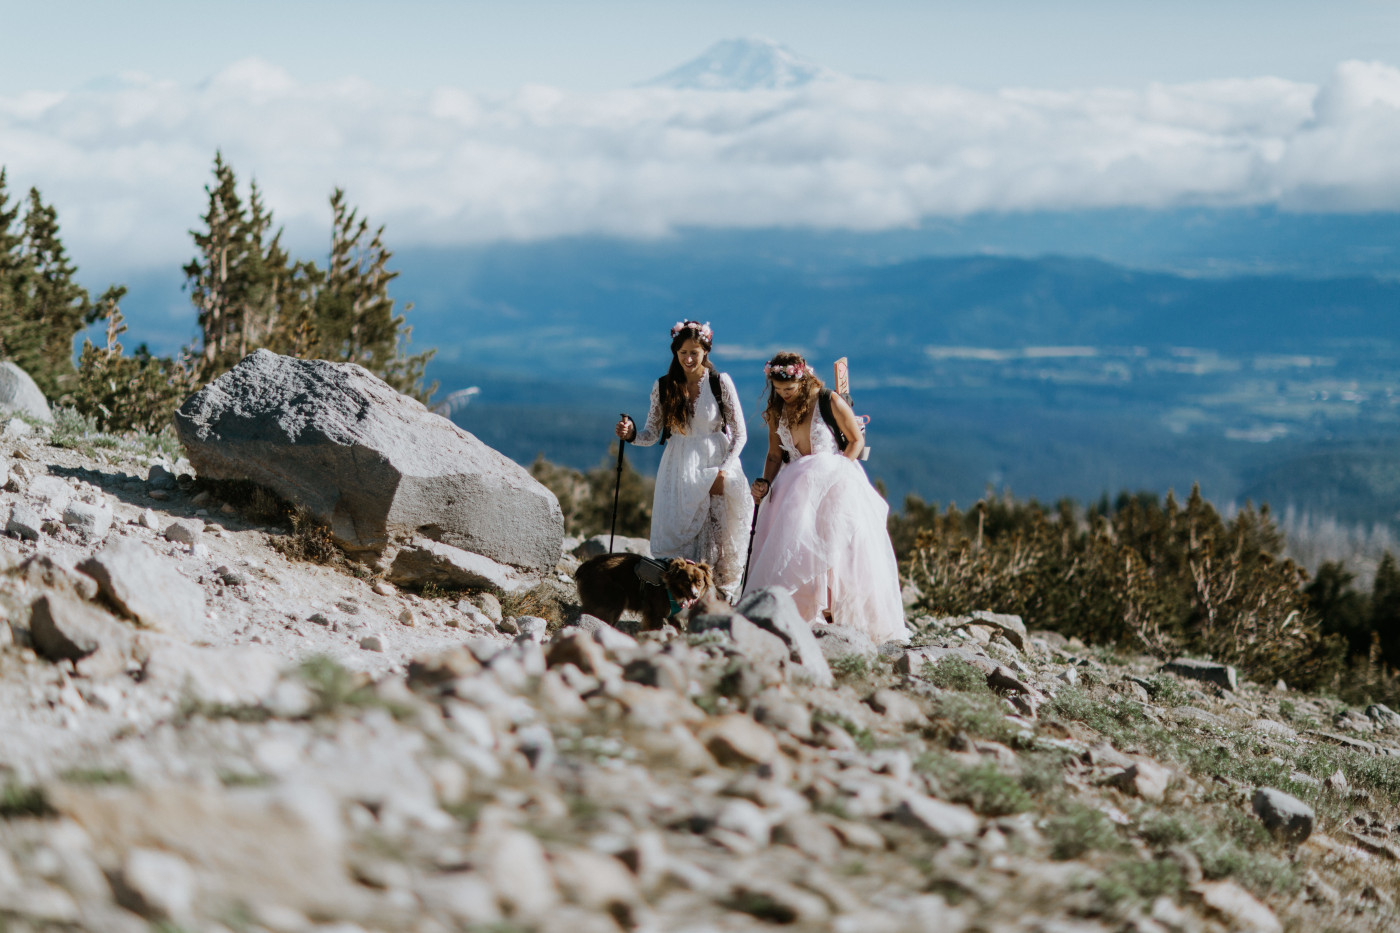 Margaux and Heather hike up the rocky side of Mount Hood. Elopement photography at Mount Hood by Sienna Plus Josh.